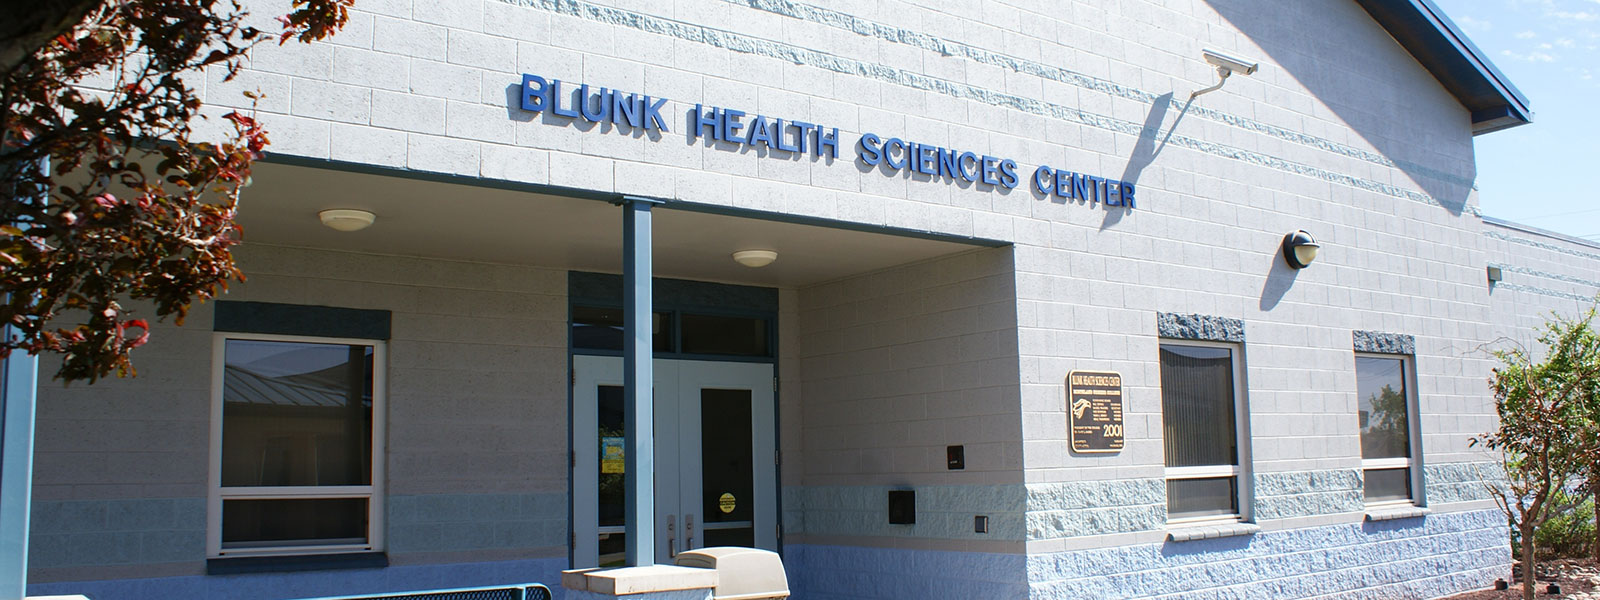 The Blunk Science Center on the Winslow Campus